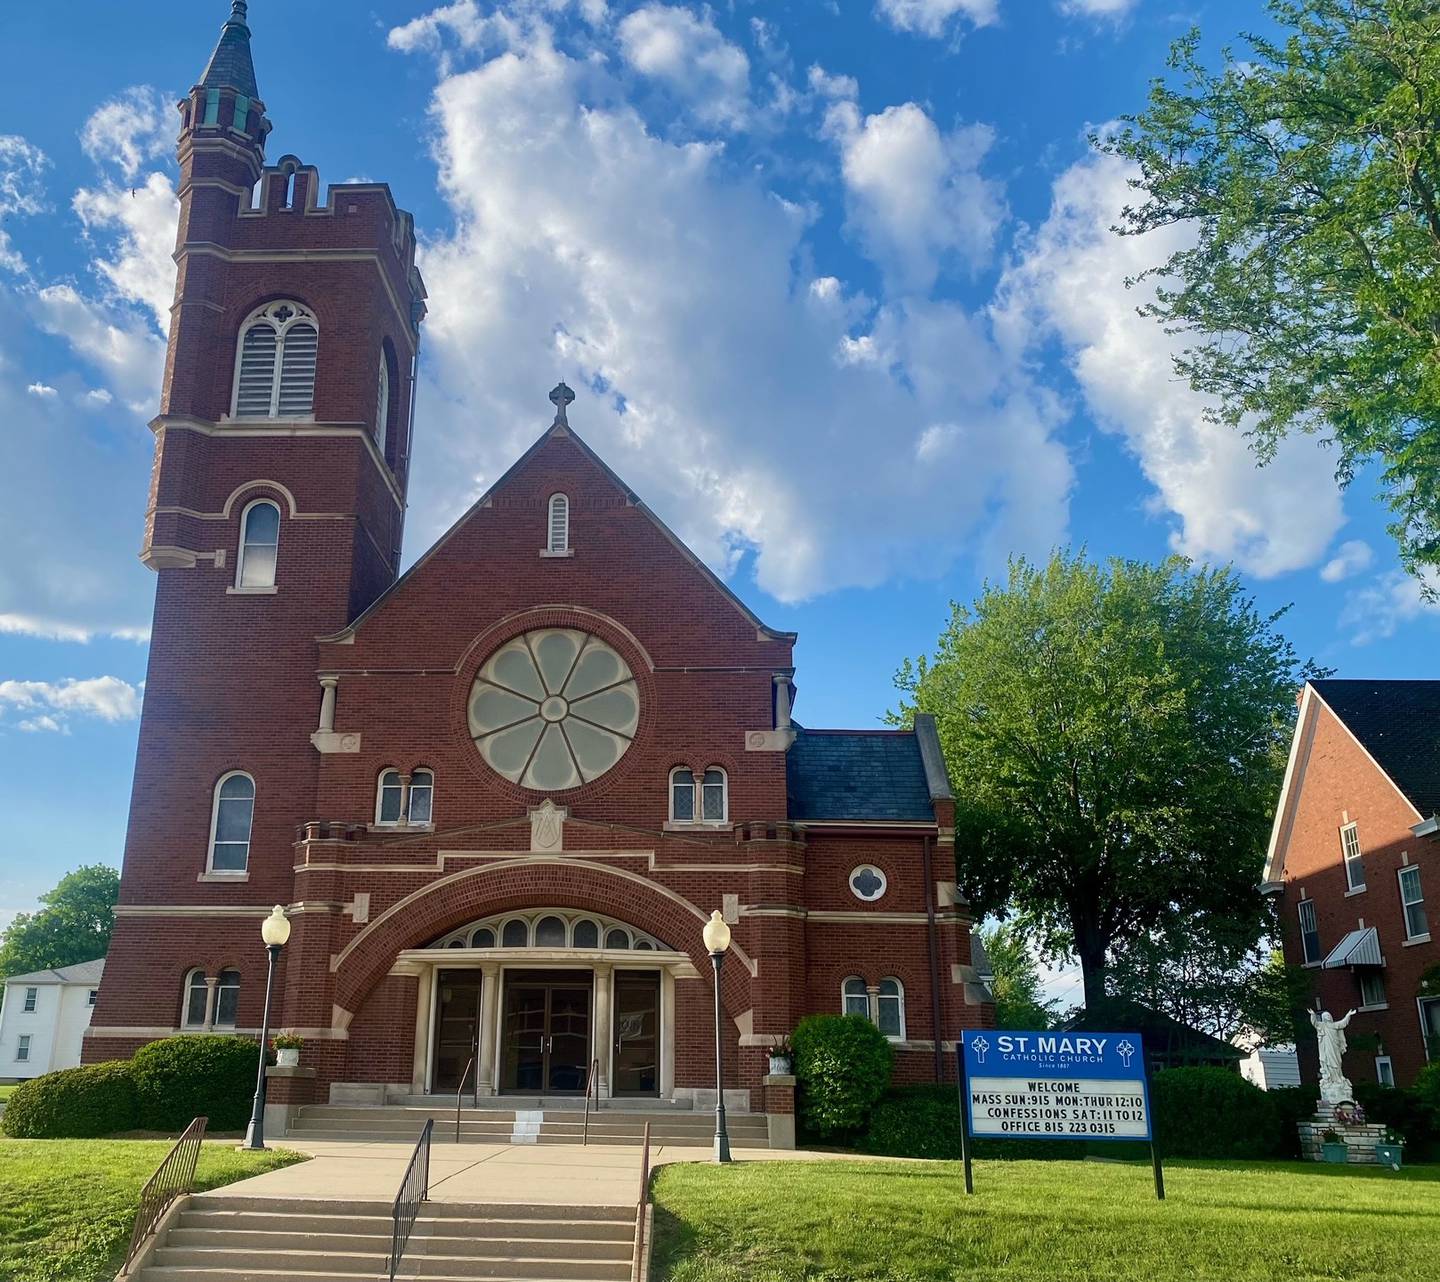 St. Mary in Peru is one of the churches named to close with the recent announcement from the Peoria Diocese. The church will merge with St. Valentine in Peru along with St. Joseph.